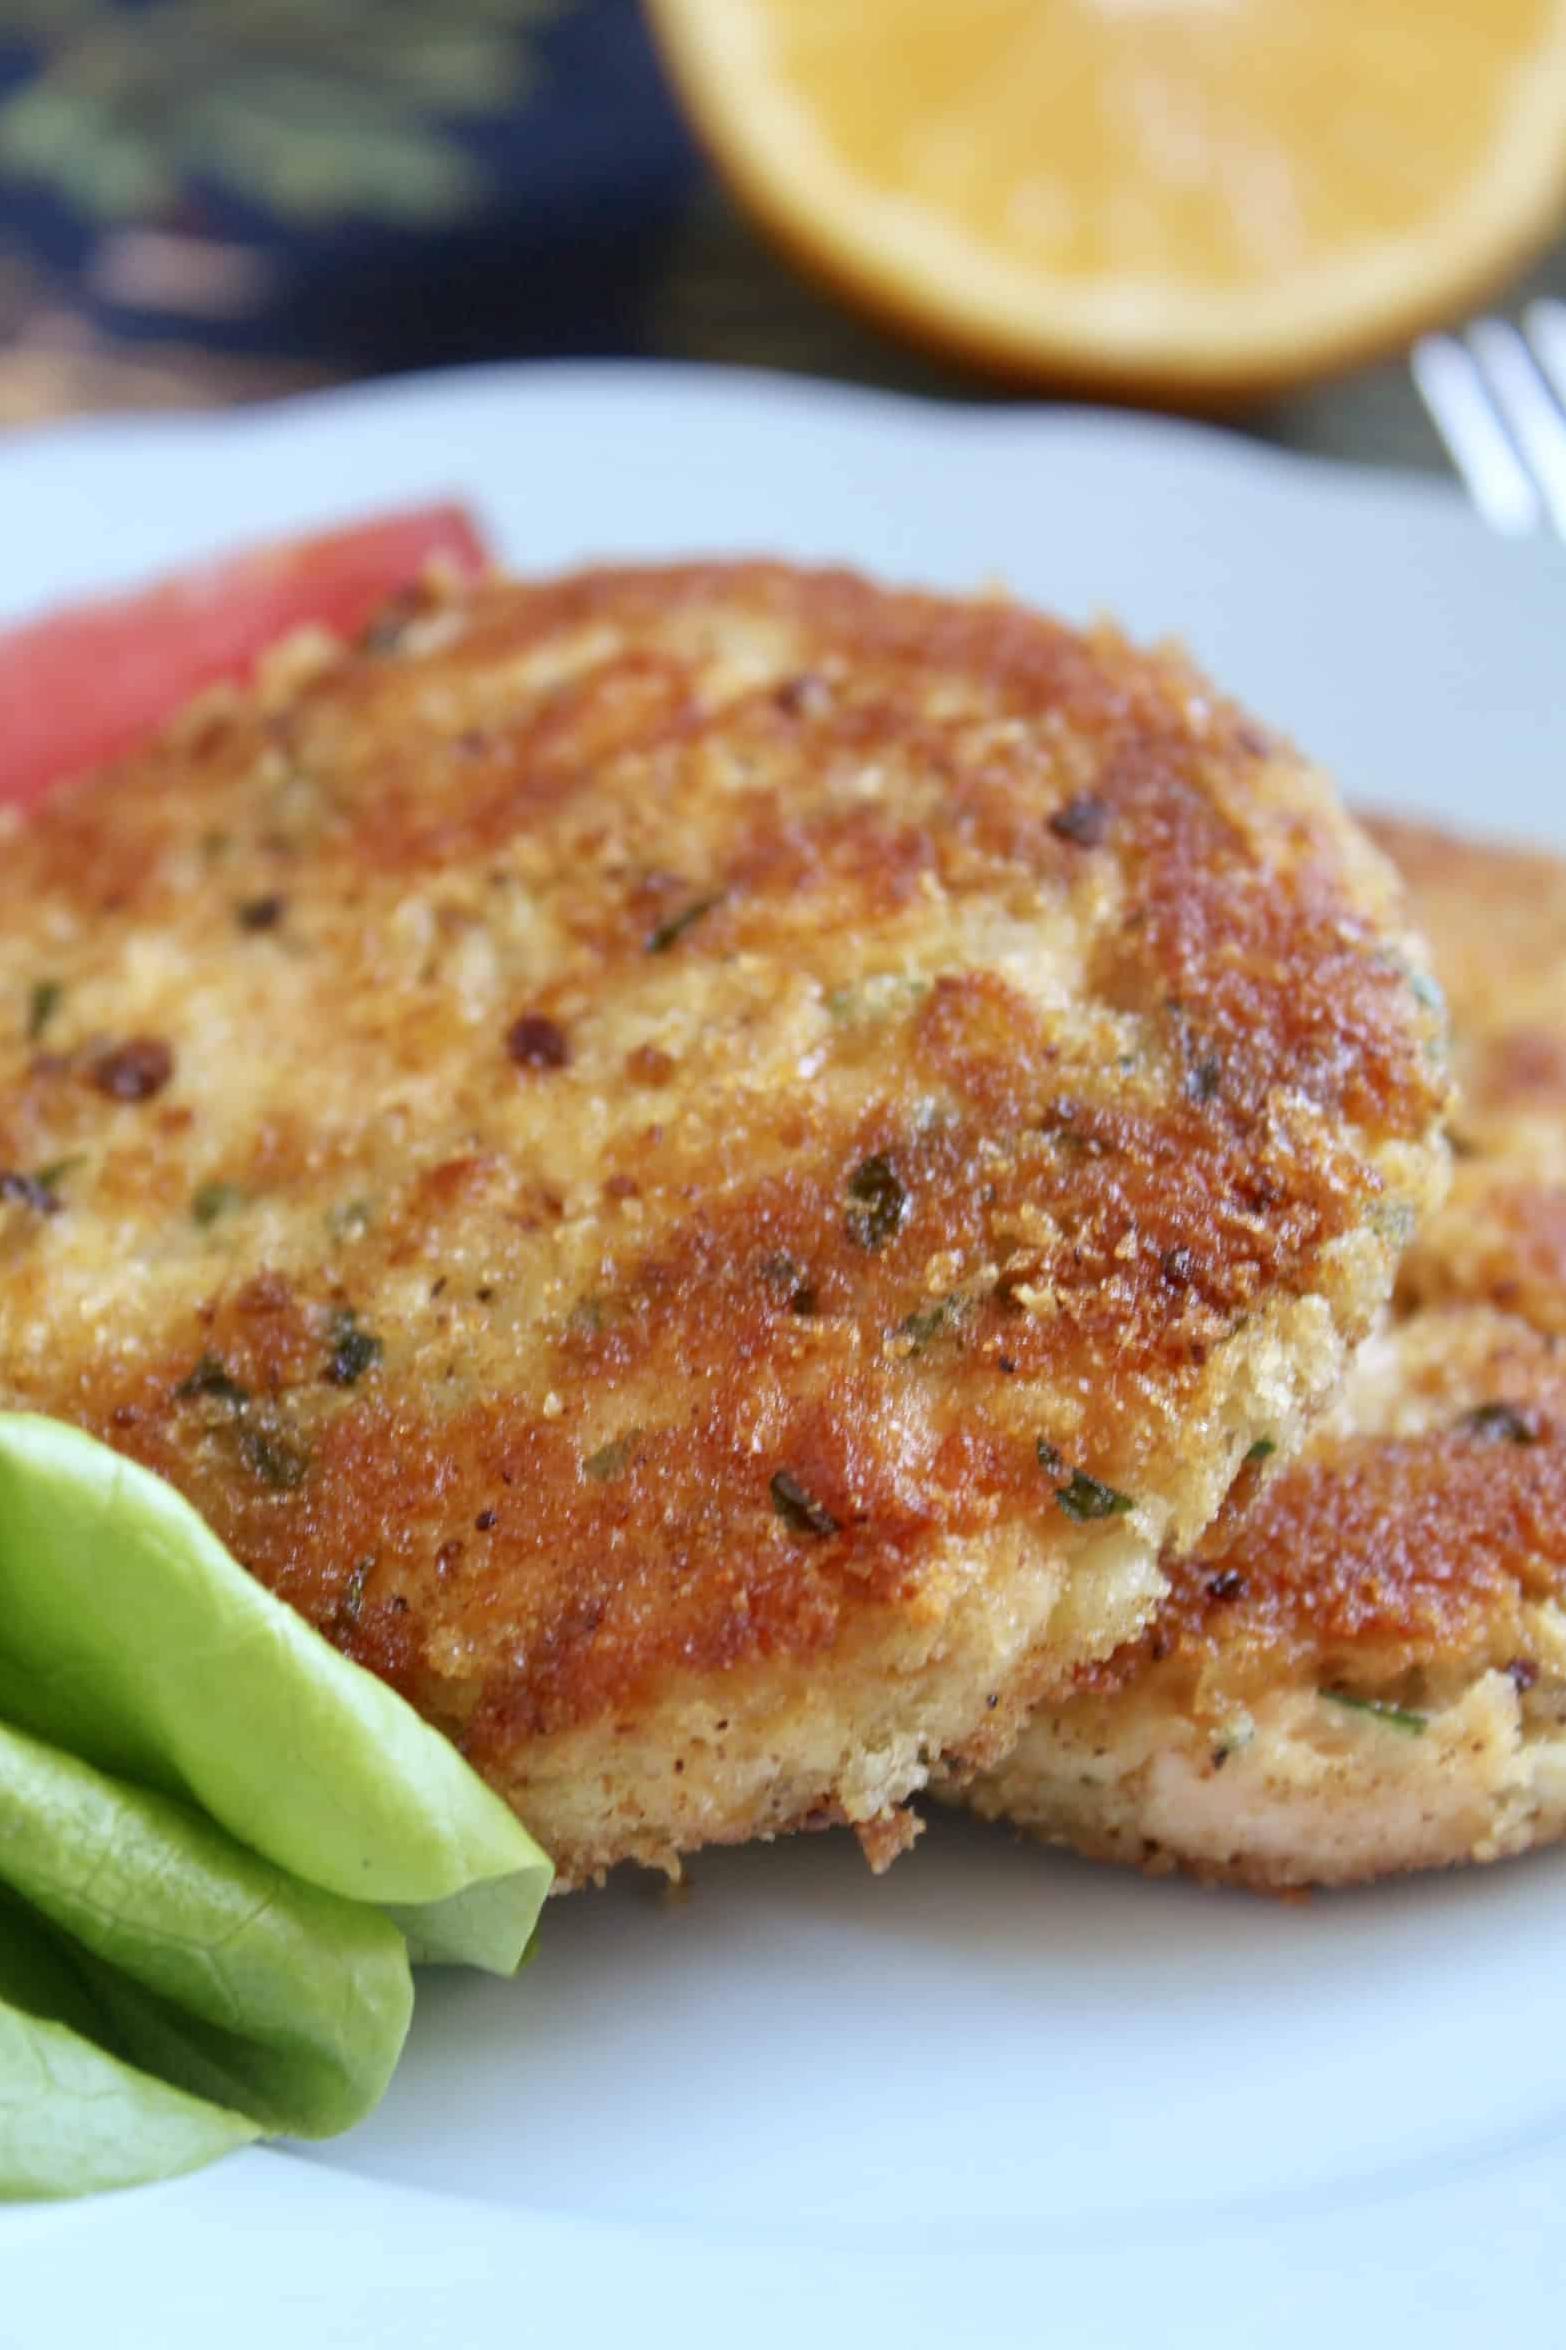  These salmon cakes are restaurant quality but made at home.